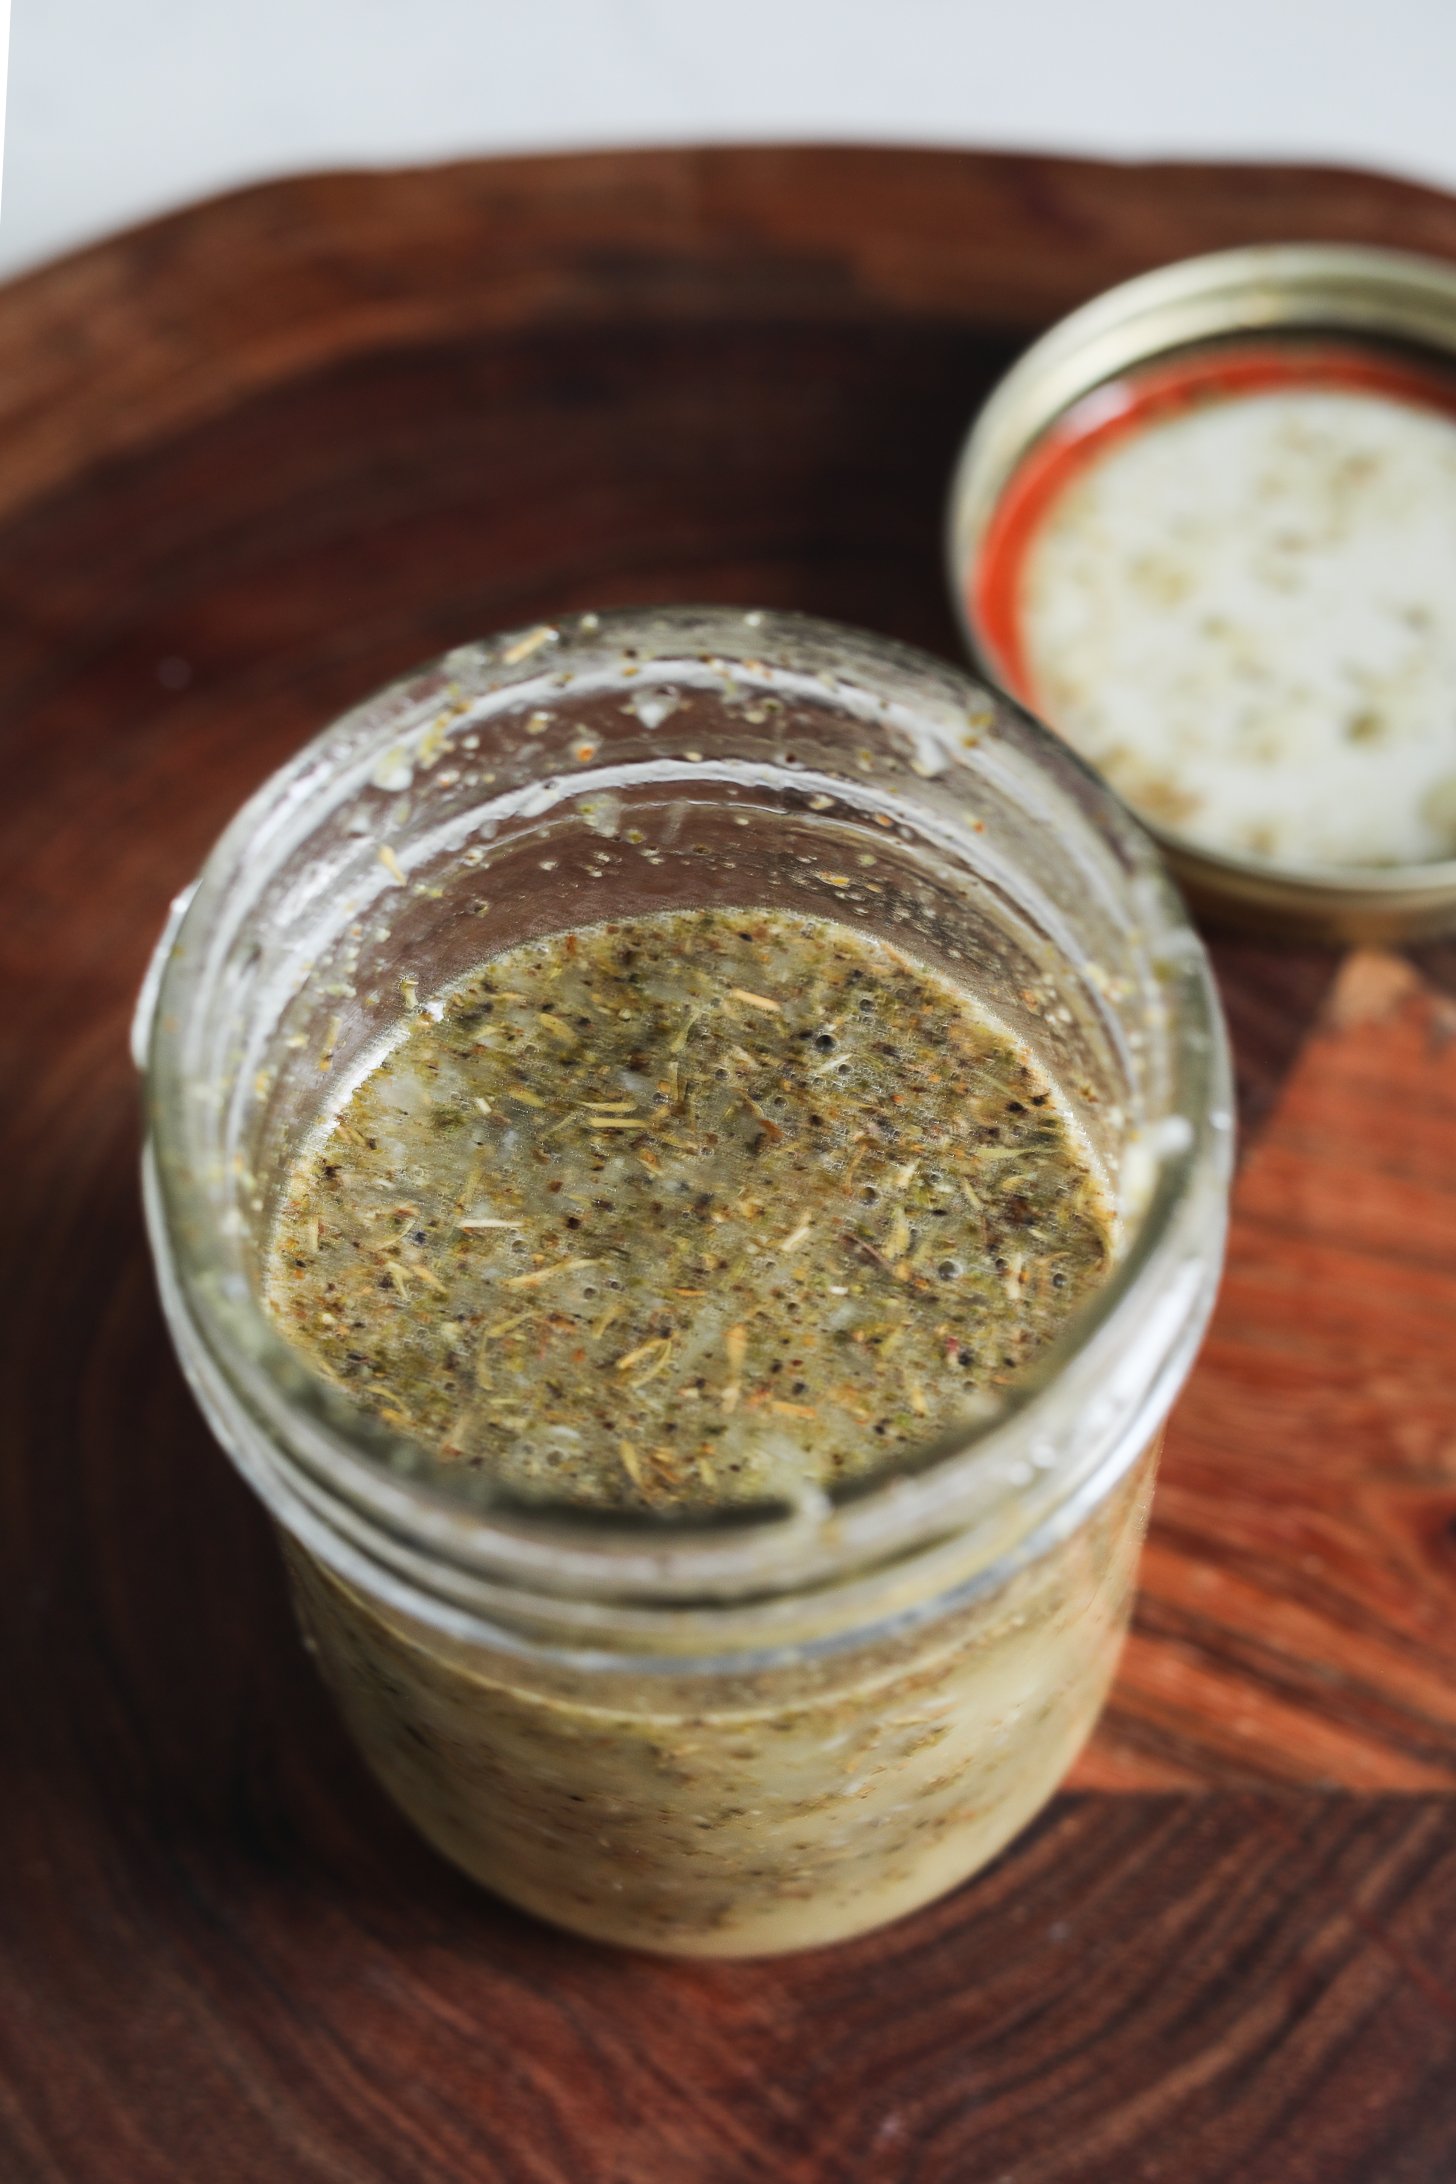 Perspective image of an open mason jar filled with lemon oil dressing, with dried herbs floating inside.